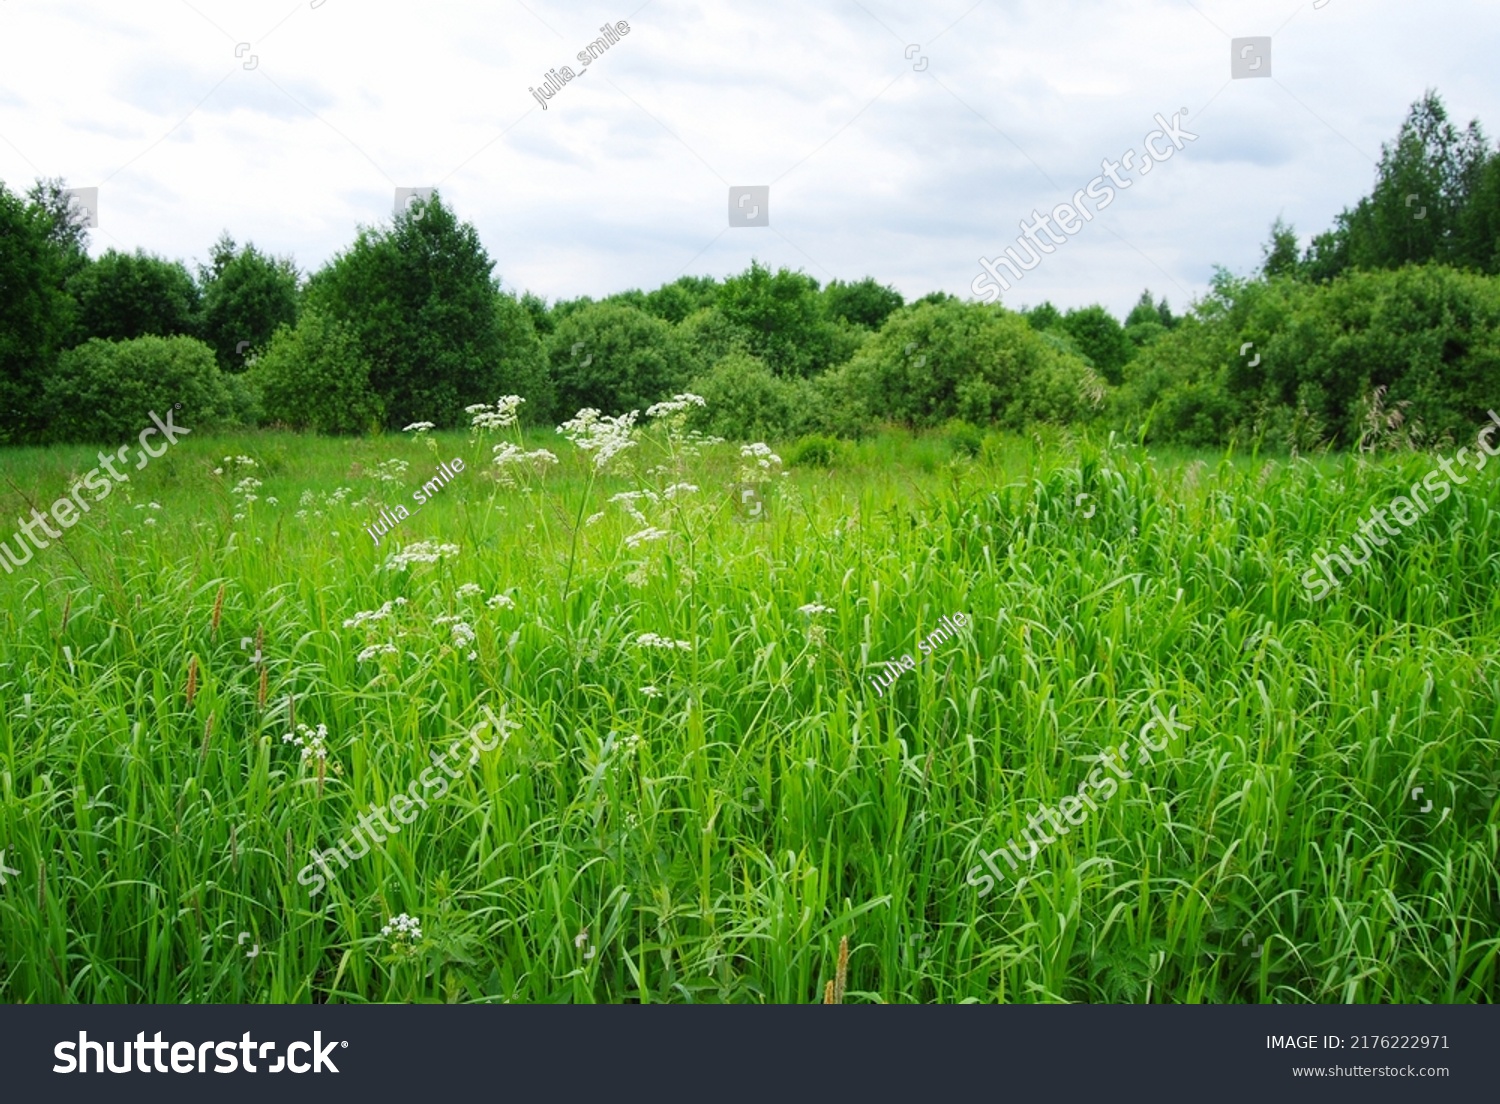 An overgrown field. White flowers in the foreground. Cloudy. Summer village landscape. Tall grass and weeds overgrown in a field. #2176222971